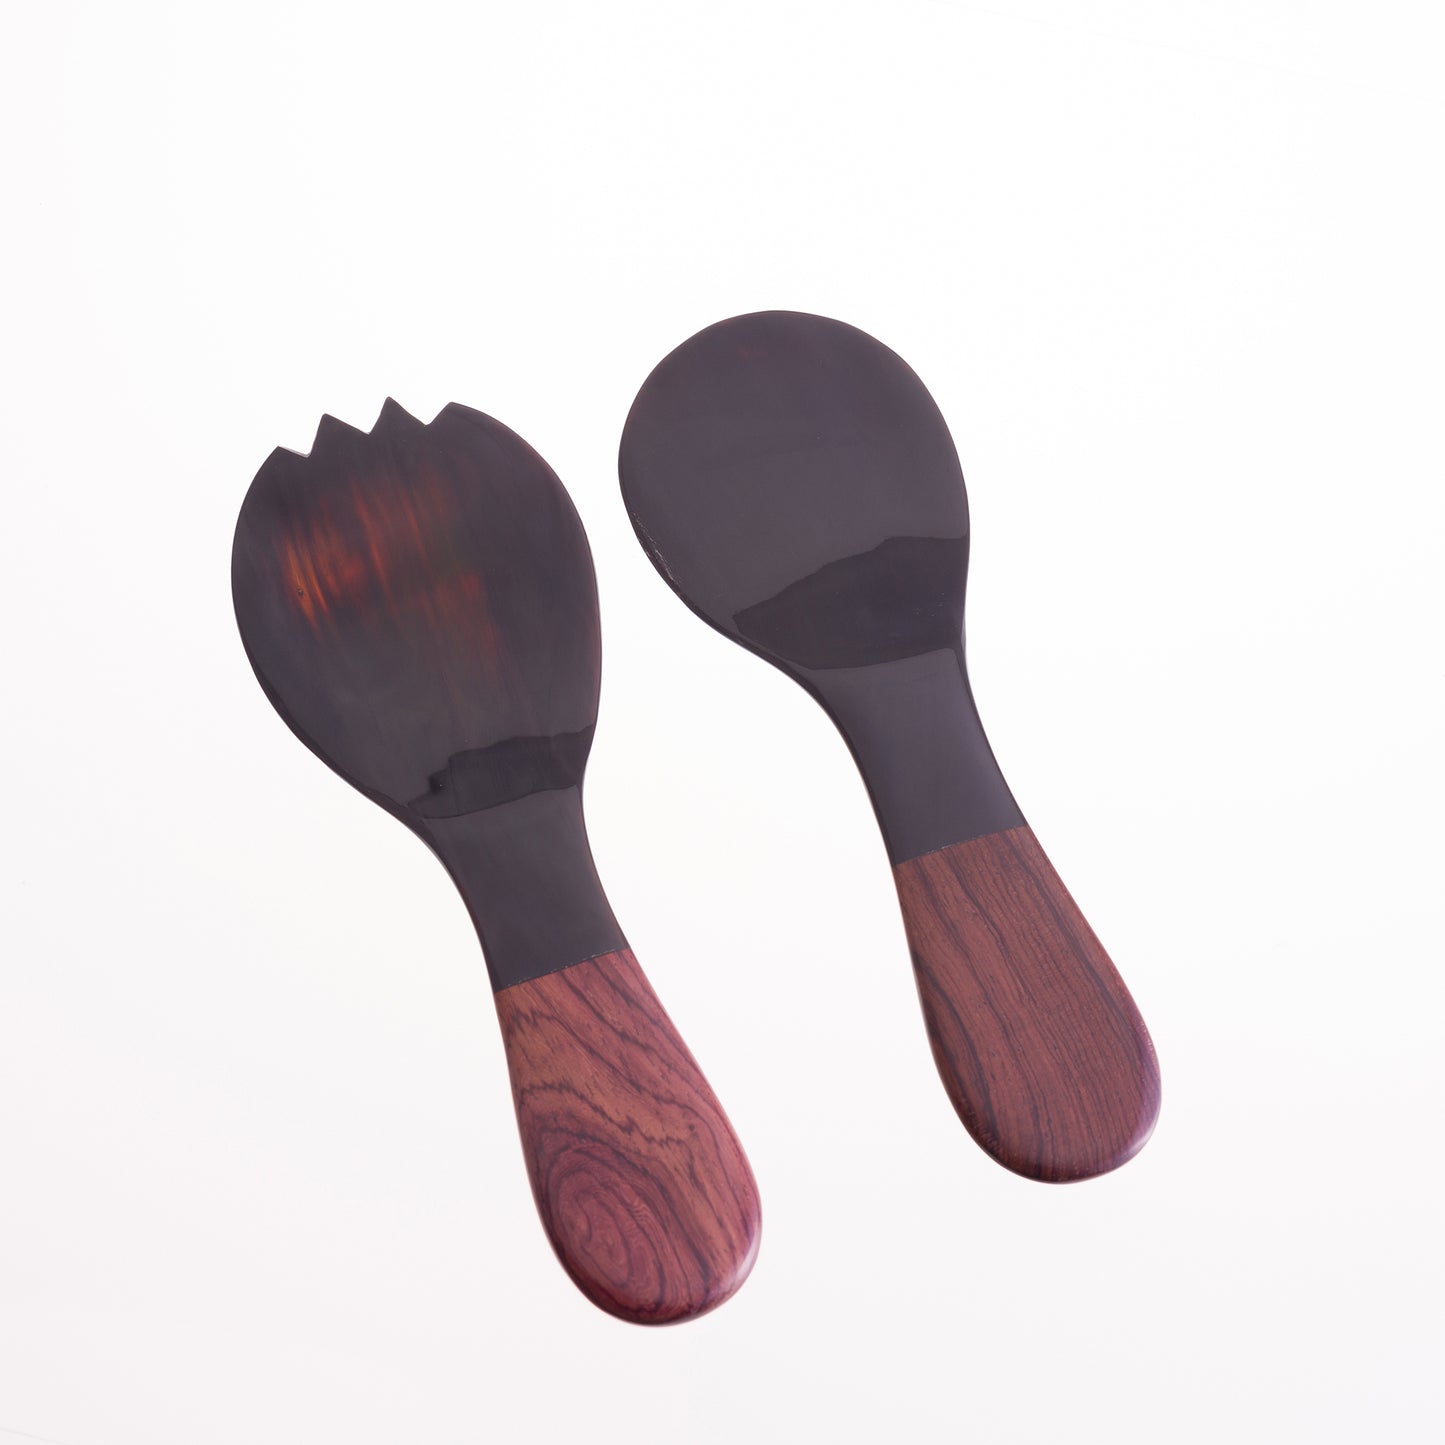 A pair of short salad servers made from water buffalo horn with rosewood handles